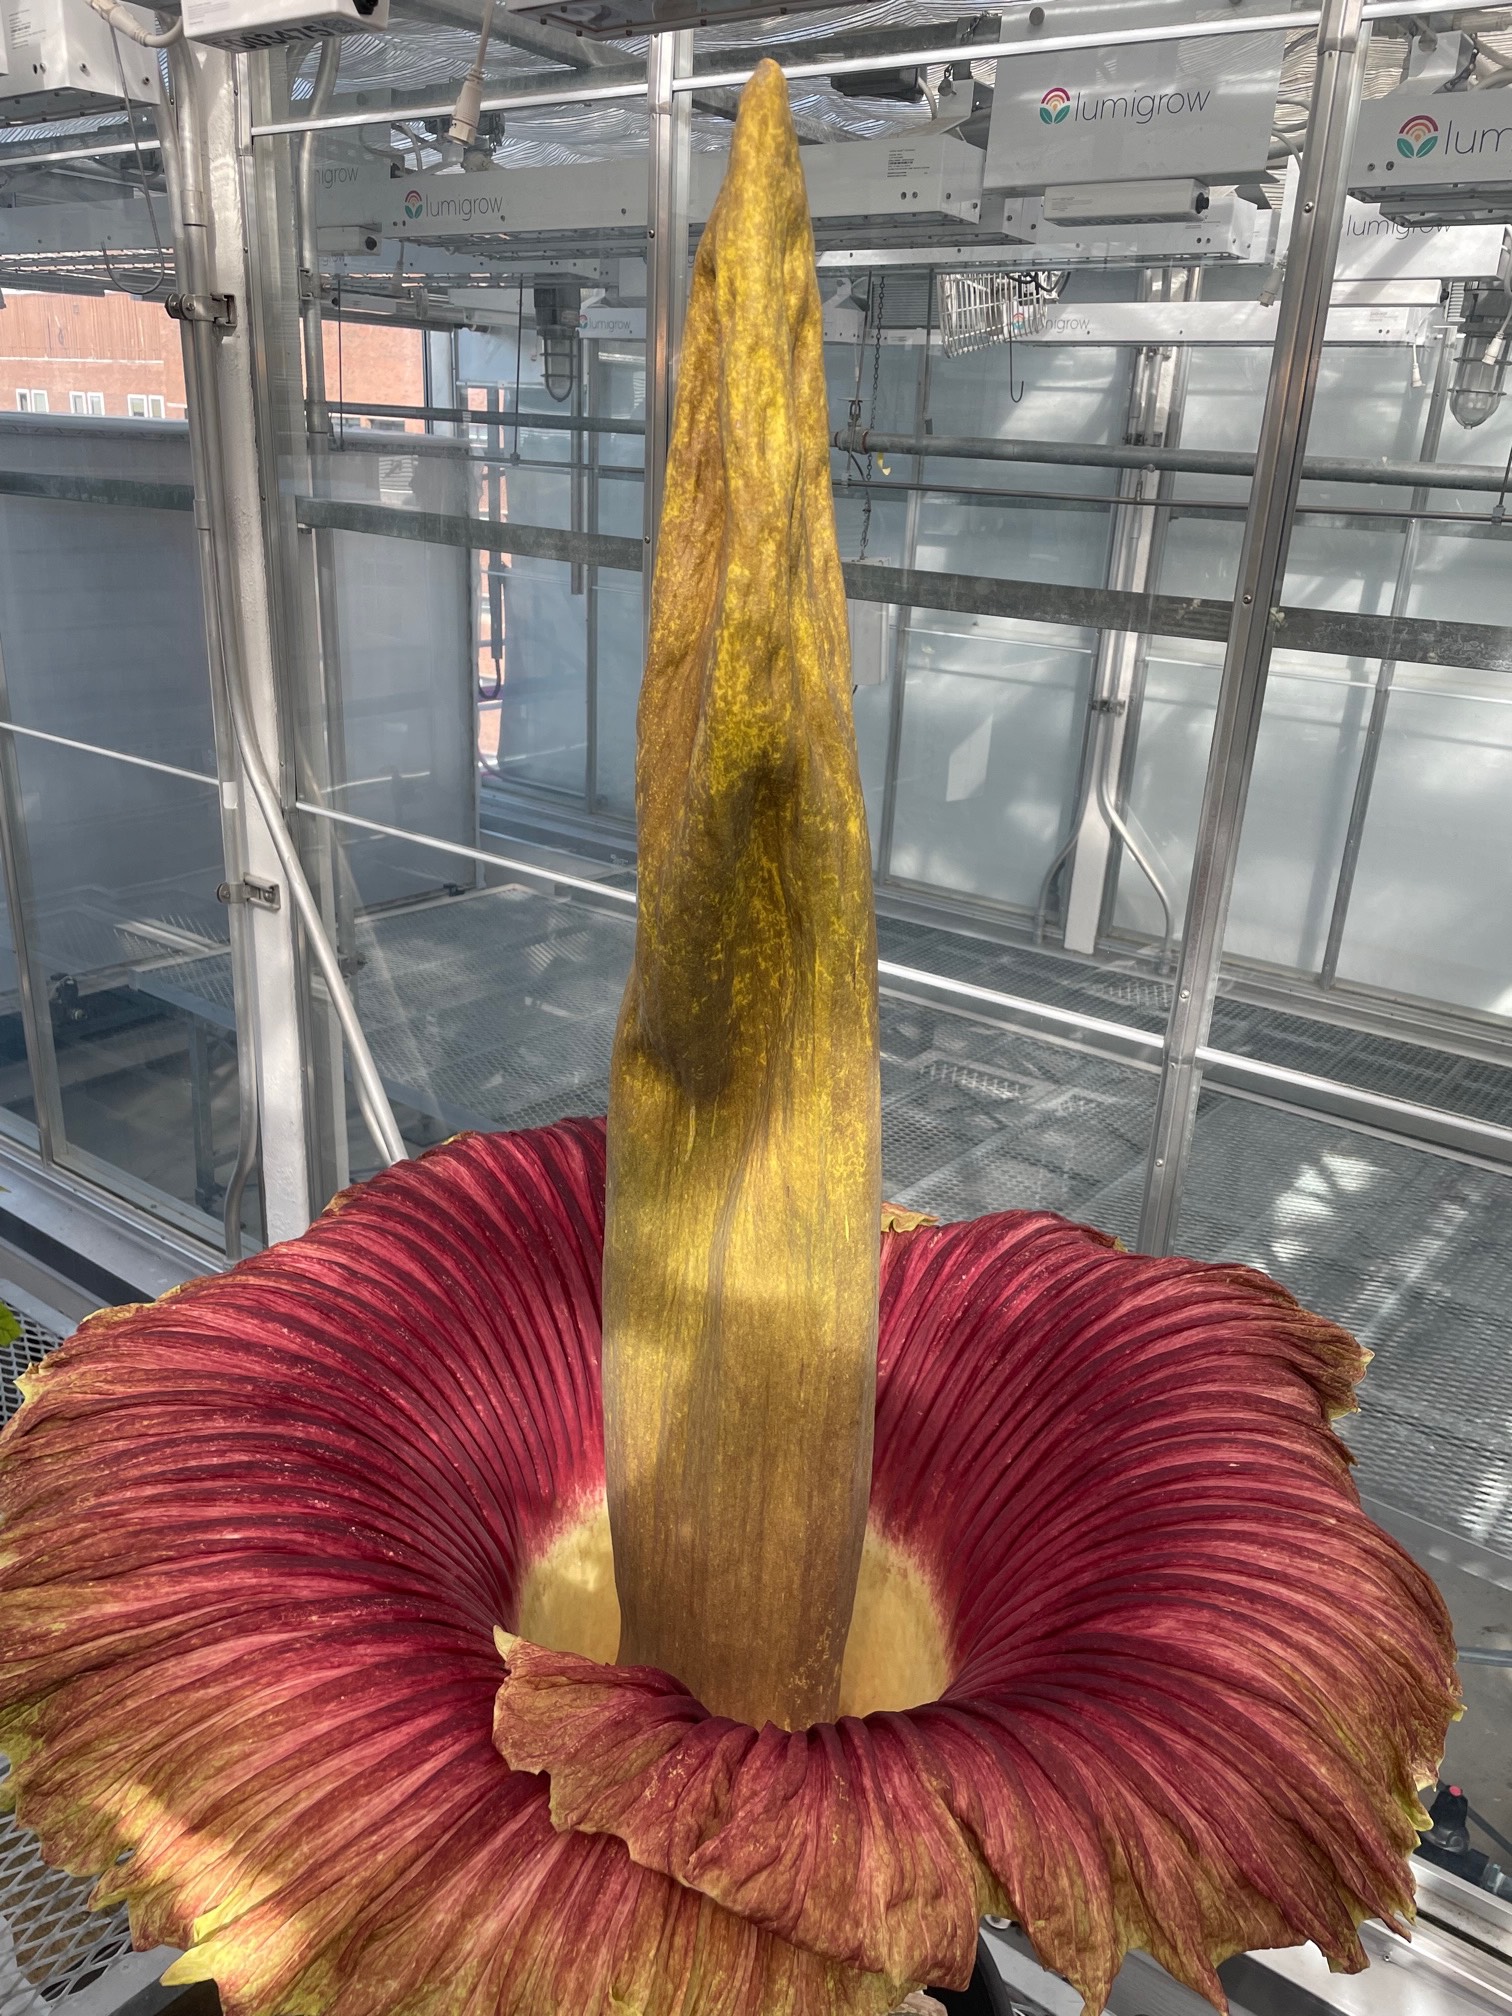 Morphy Jr during its first bloom in 2022.